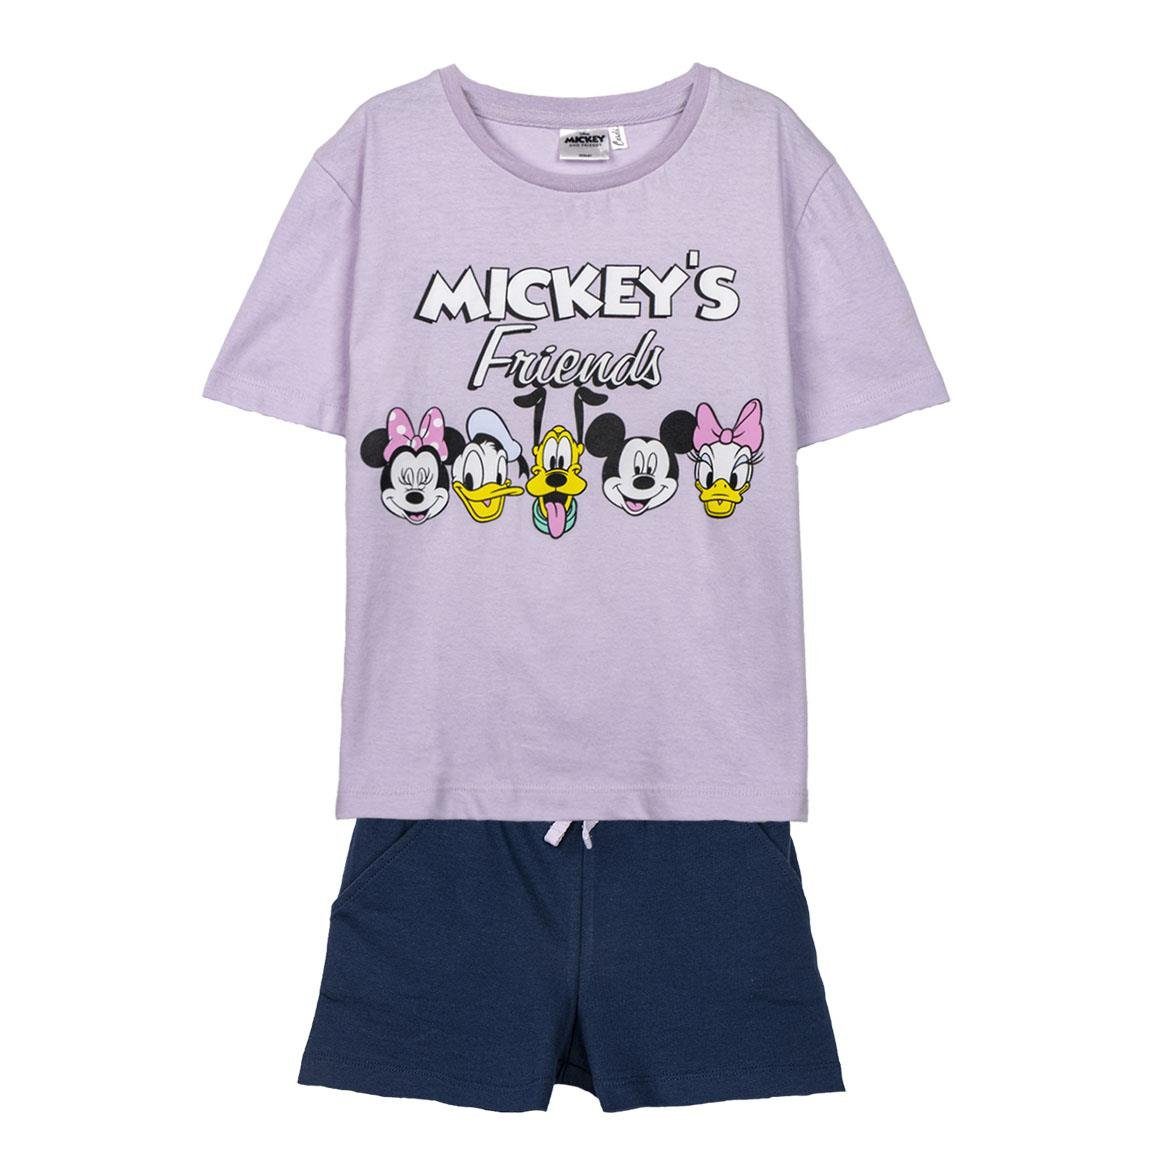 Disney Minnie Mouse T-Shirt & Shorts Mickey's Friends (2-tlg) Mädchen Sommeroutfit Gr. 98 - 122 cm